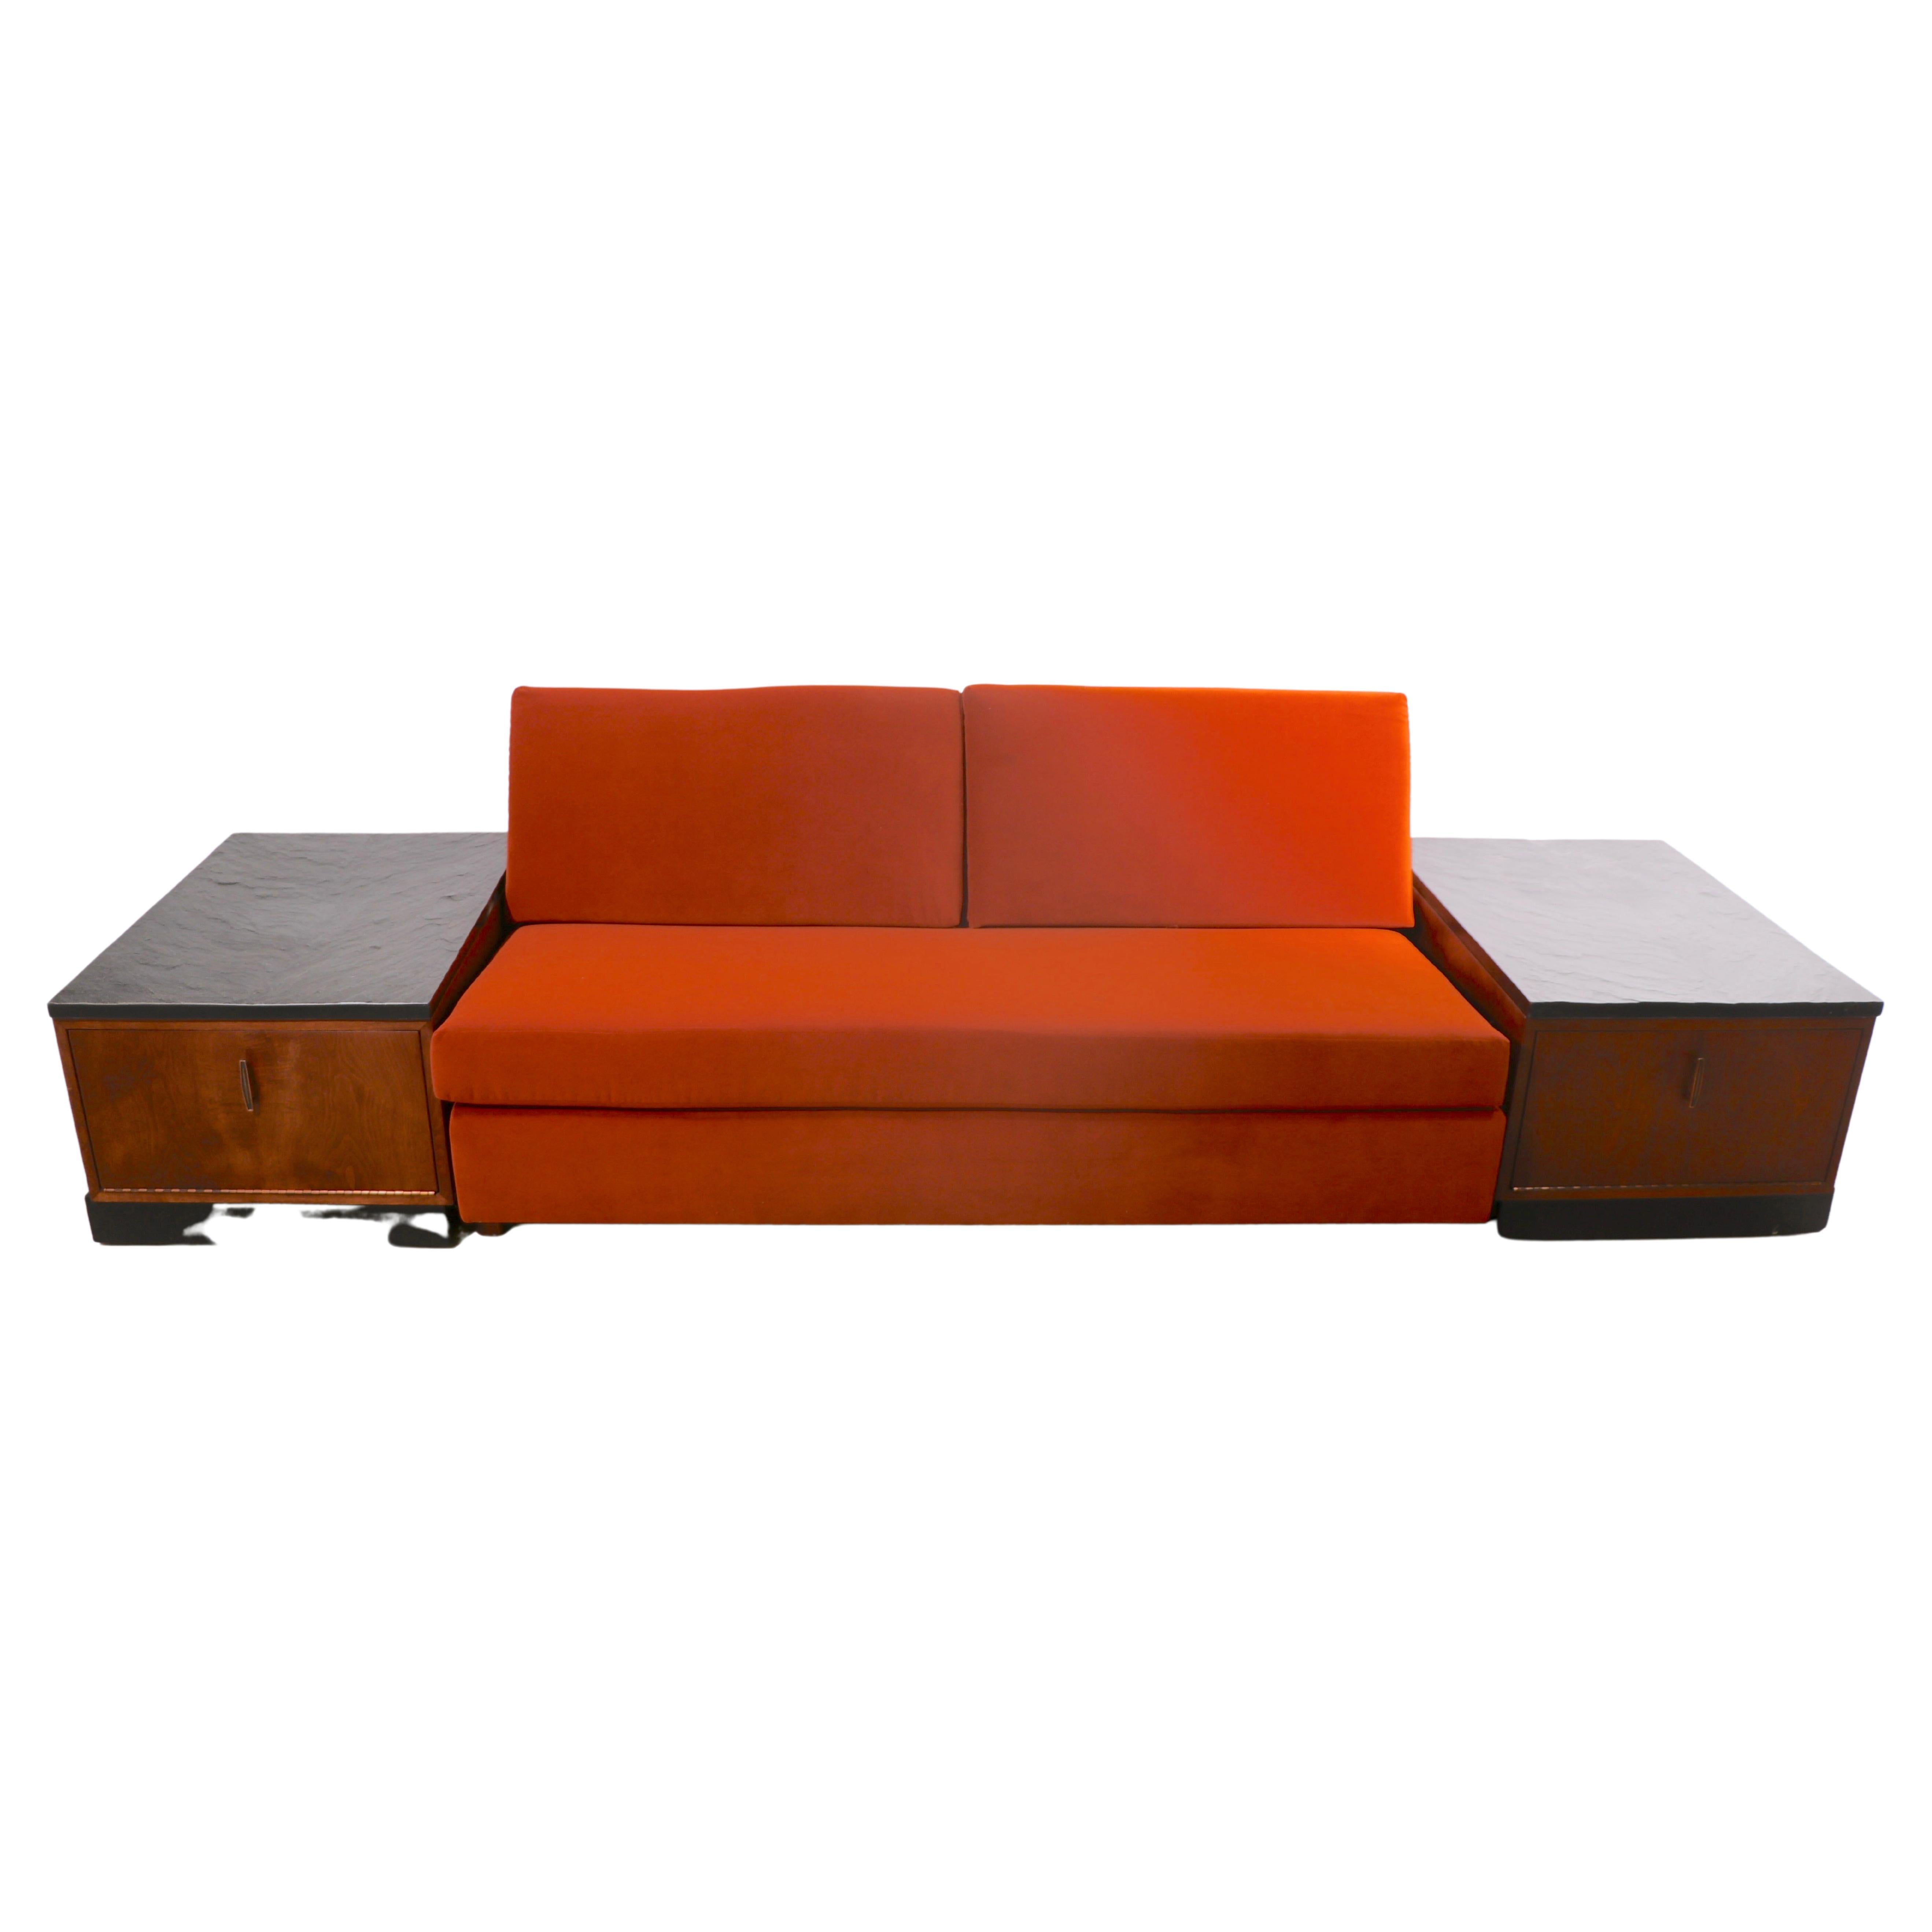 Architectural bench style sofa with cabinet end table sides, designed by Adrian Pearsall for Craft Associates. The sofa set consists of two end tables, each having a walnut case, with a pull down door front, with optional faux slate tops, on black